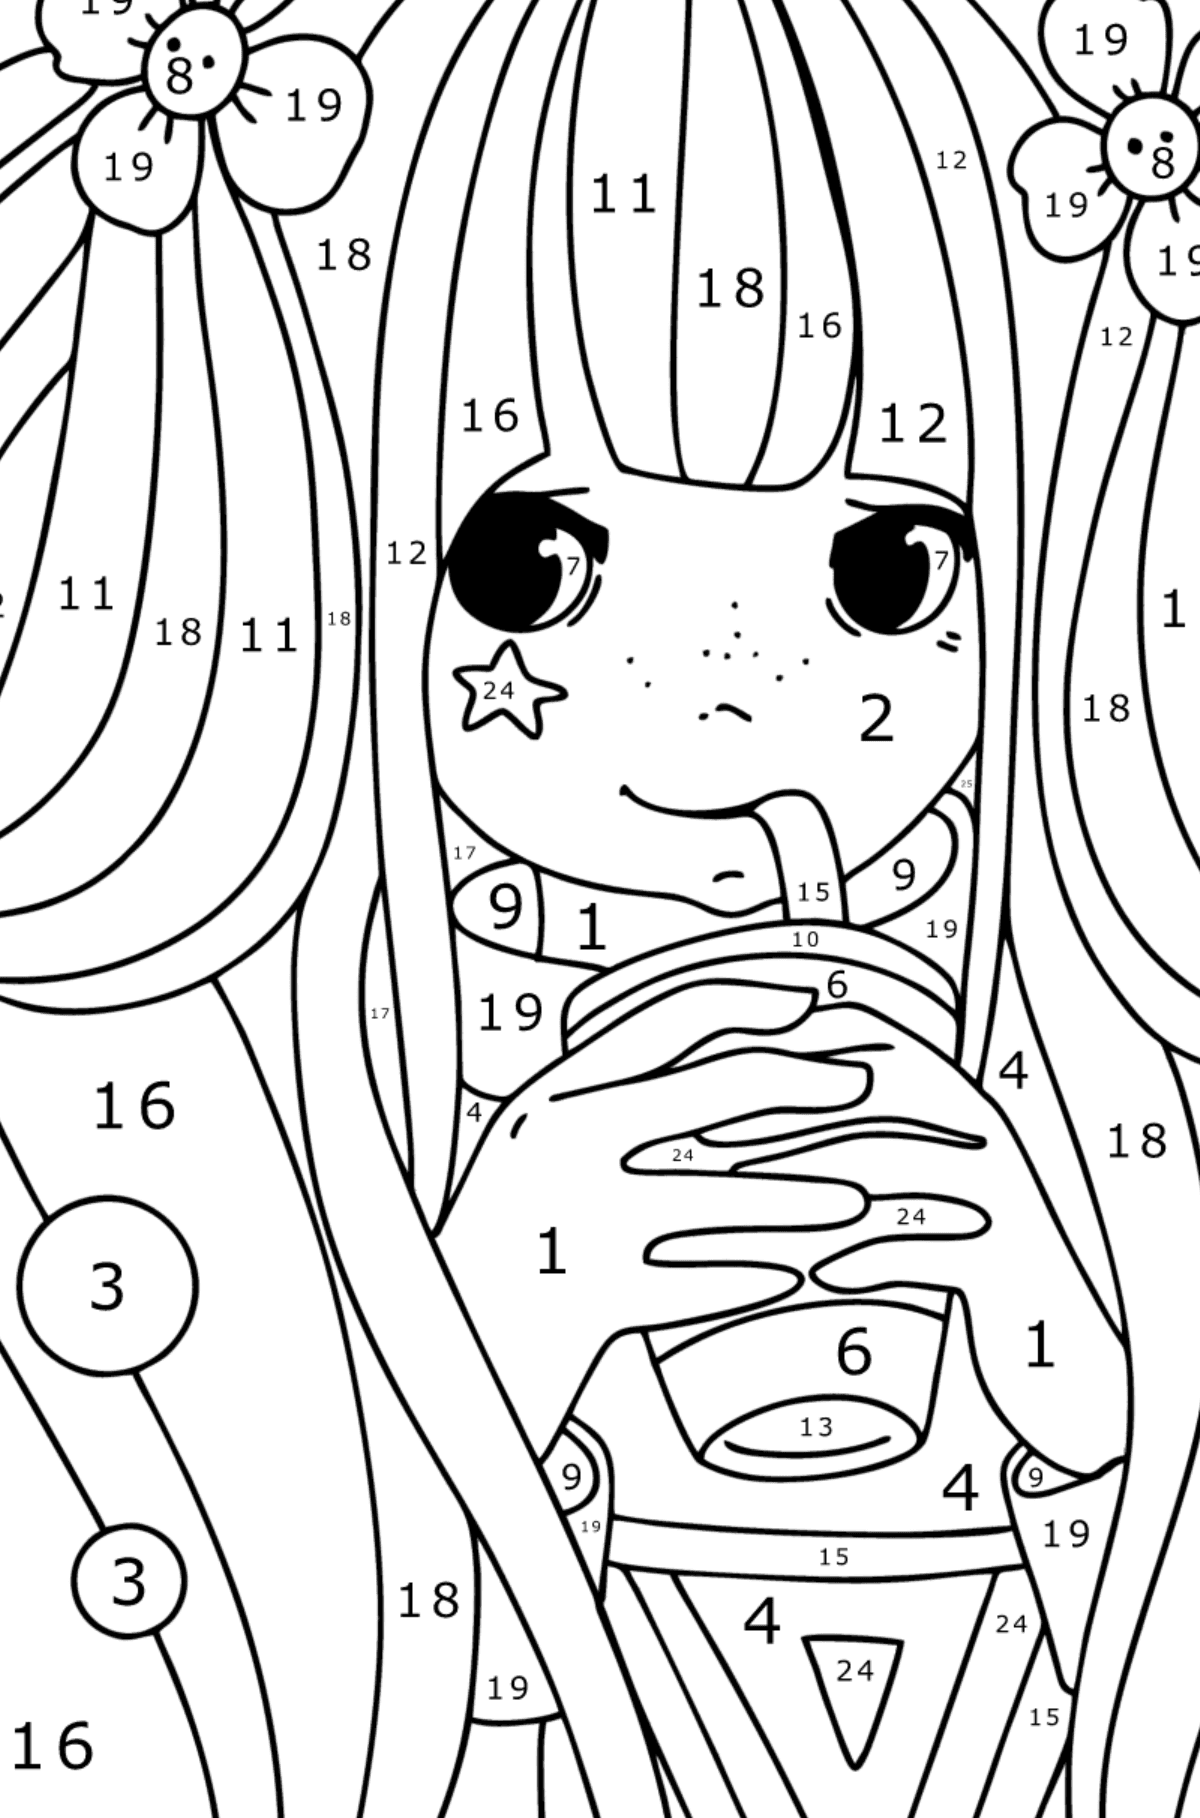 Girl anime fashionista coloring page ♥ Online and Print for Free